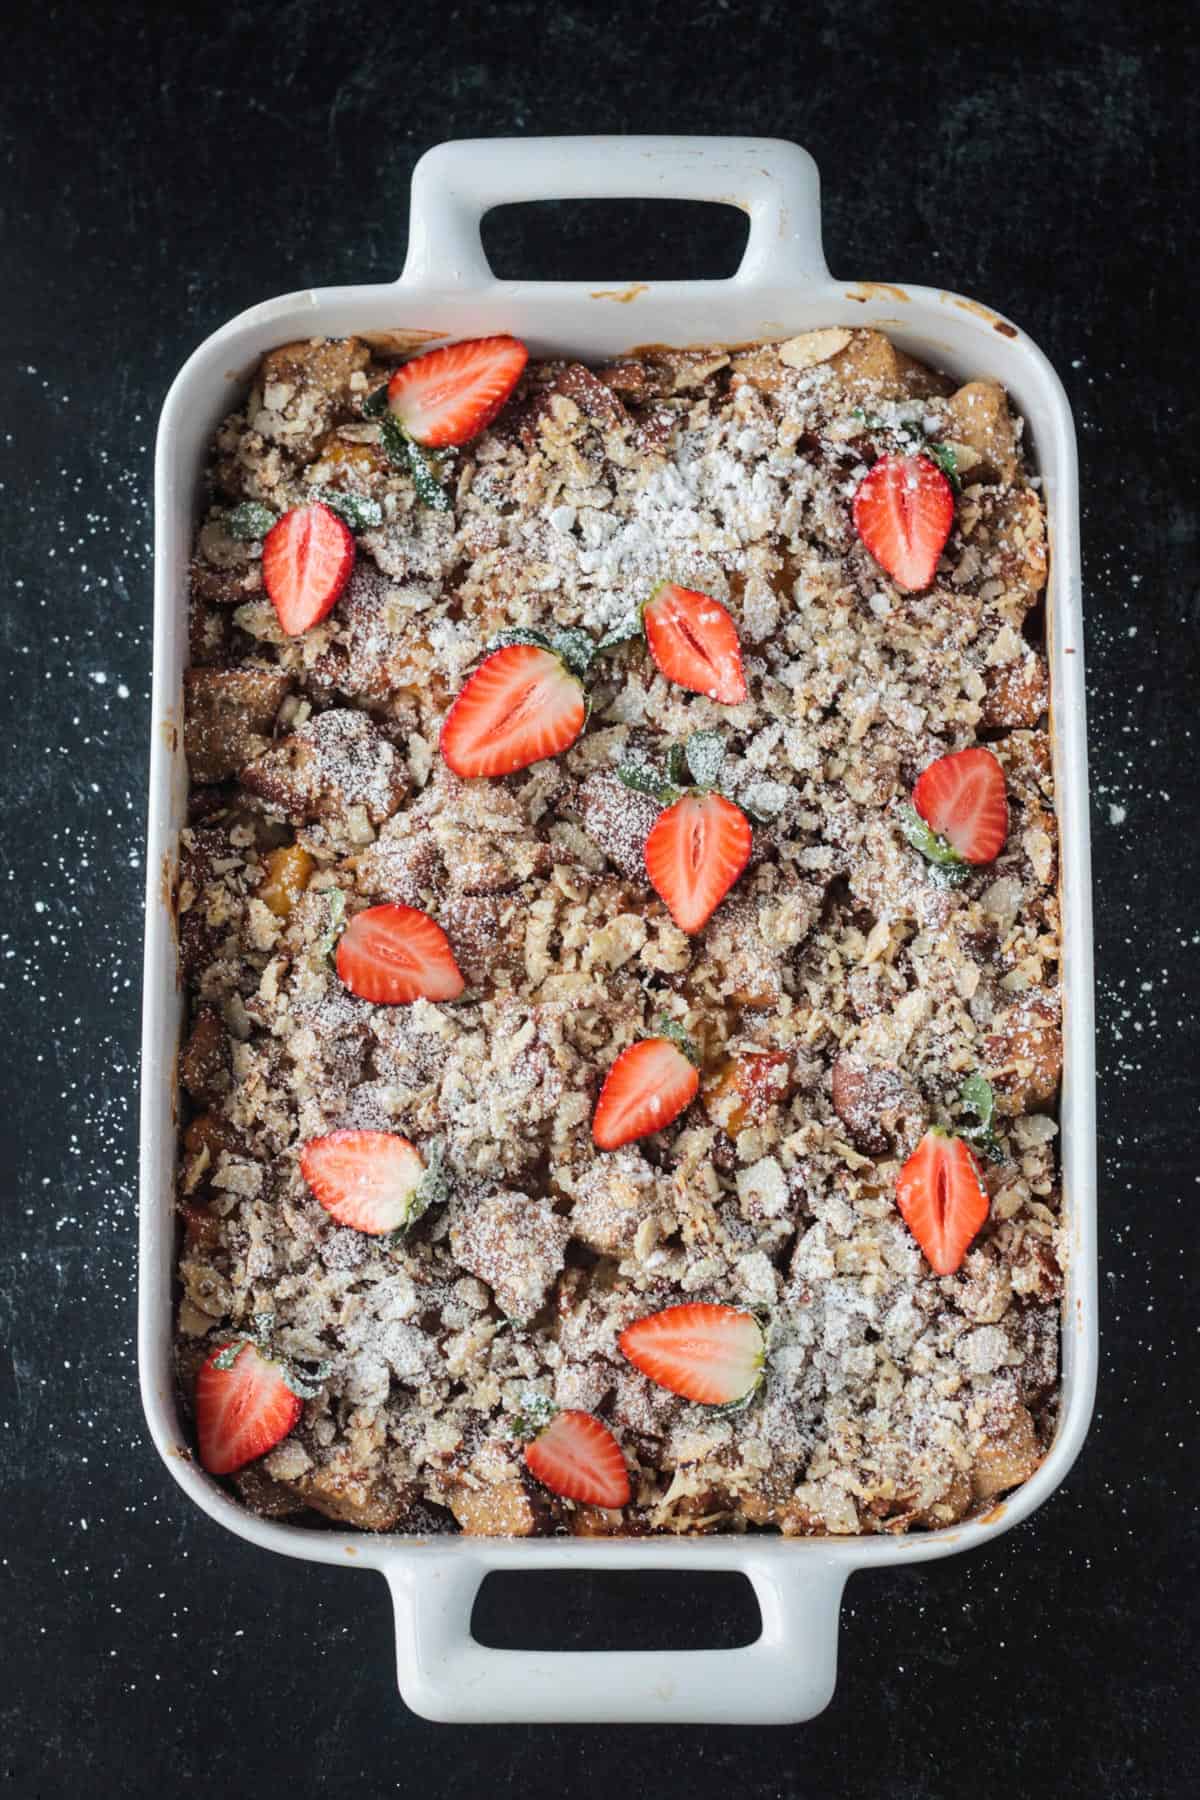 Baked casserole garnished with halved fresh strawberries and a sprinkle of powdered sugar.